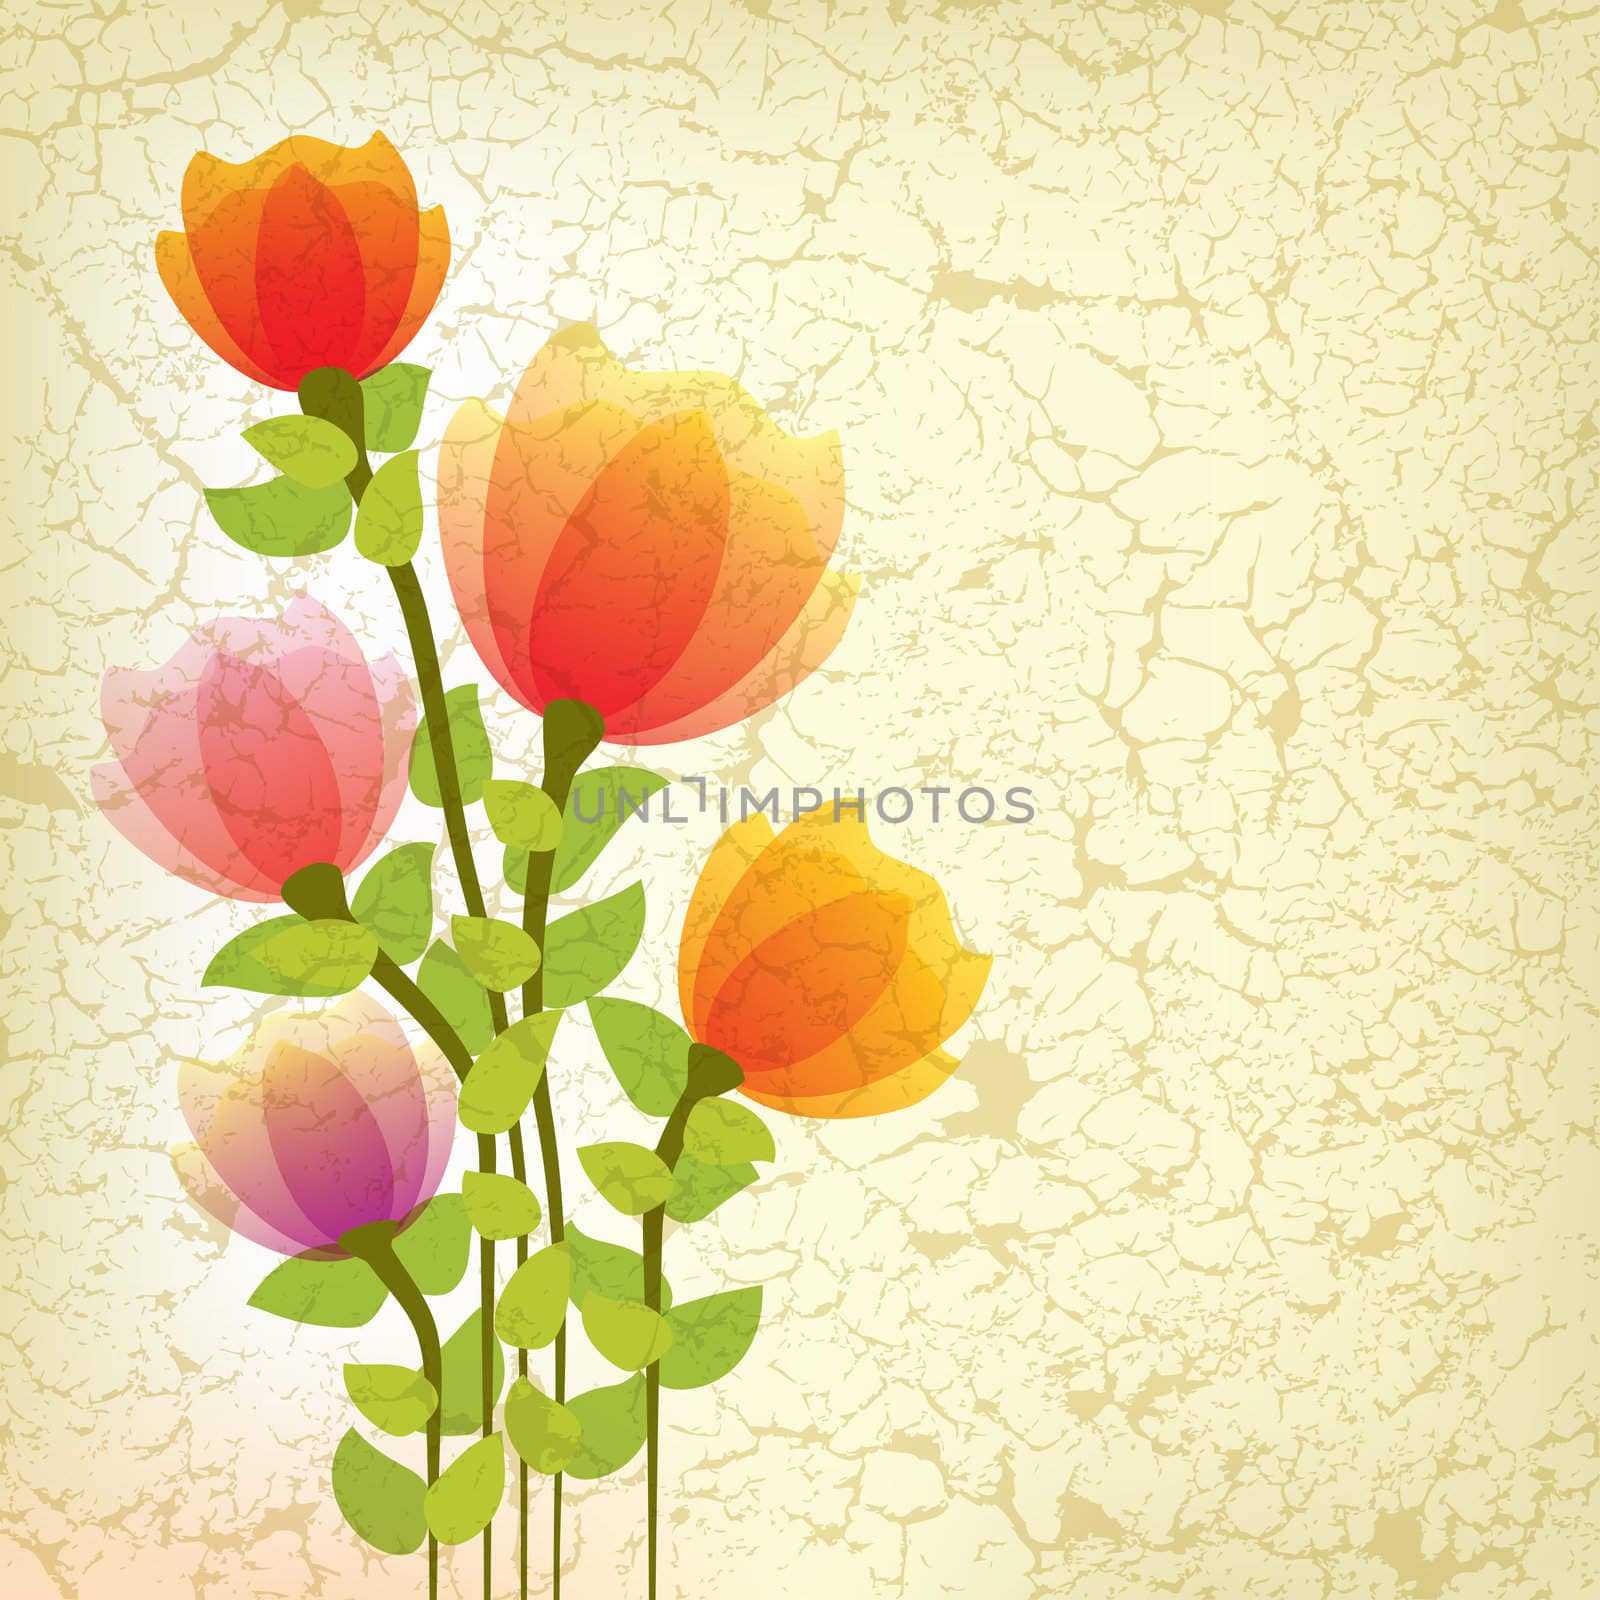 abstract floral illustration with red flowers on cracked background